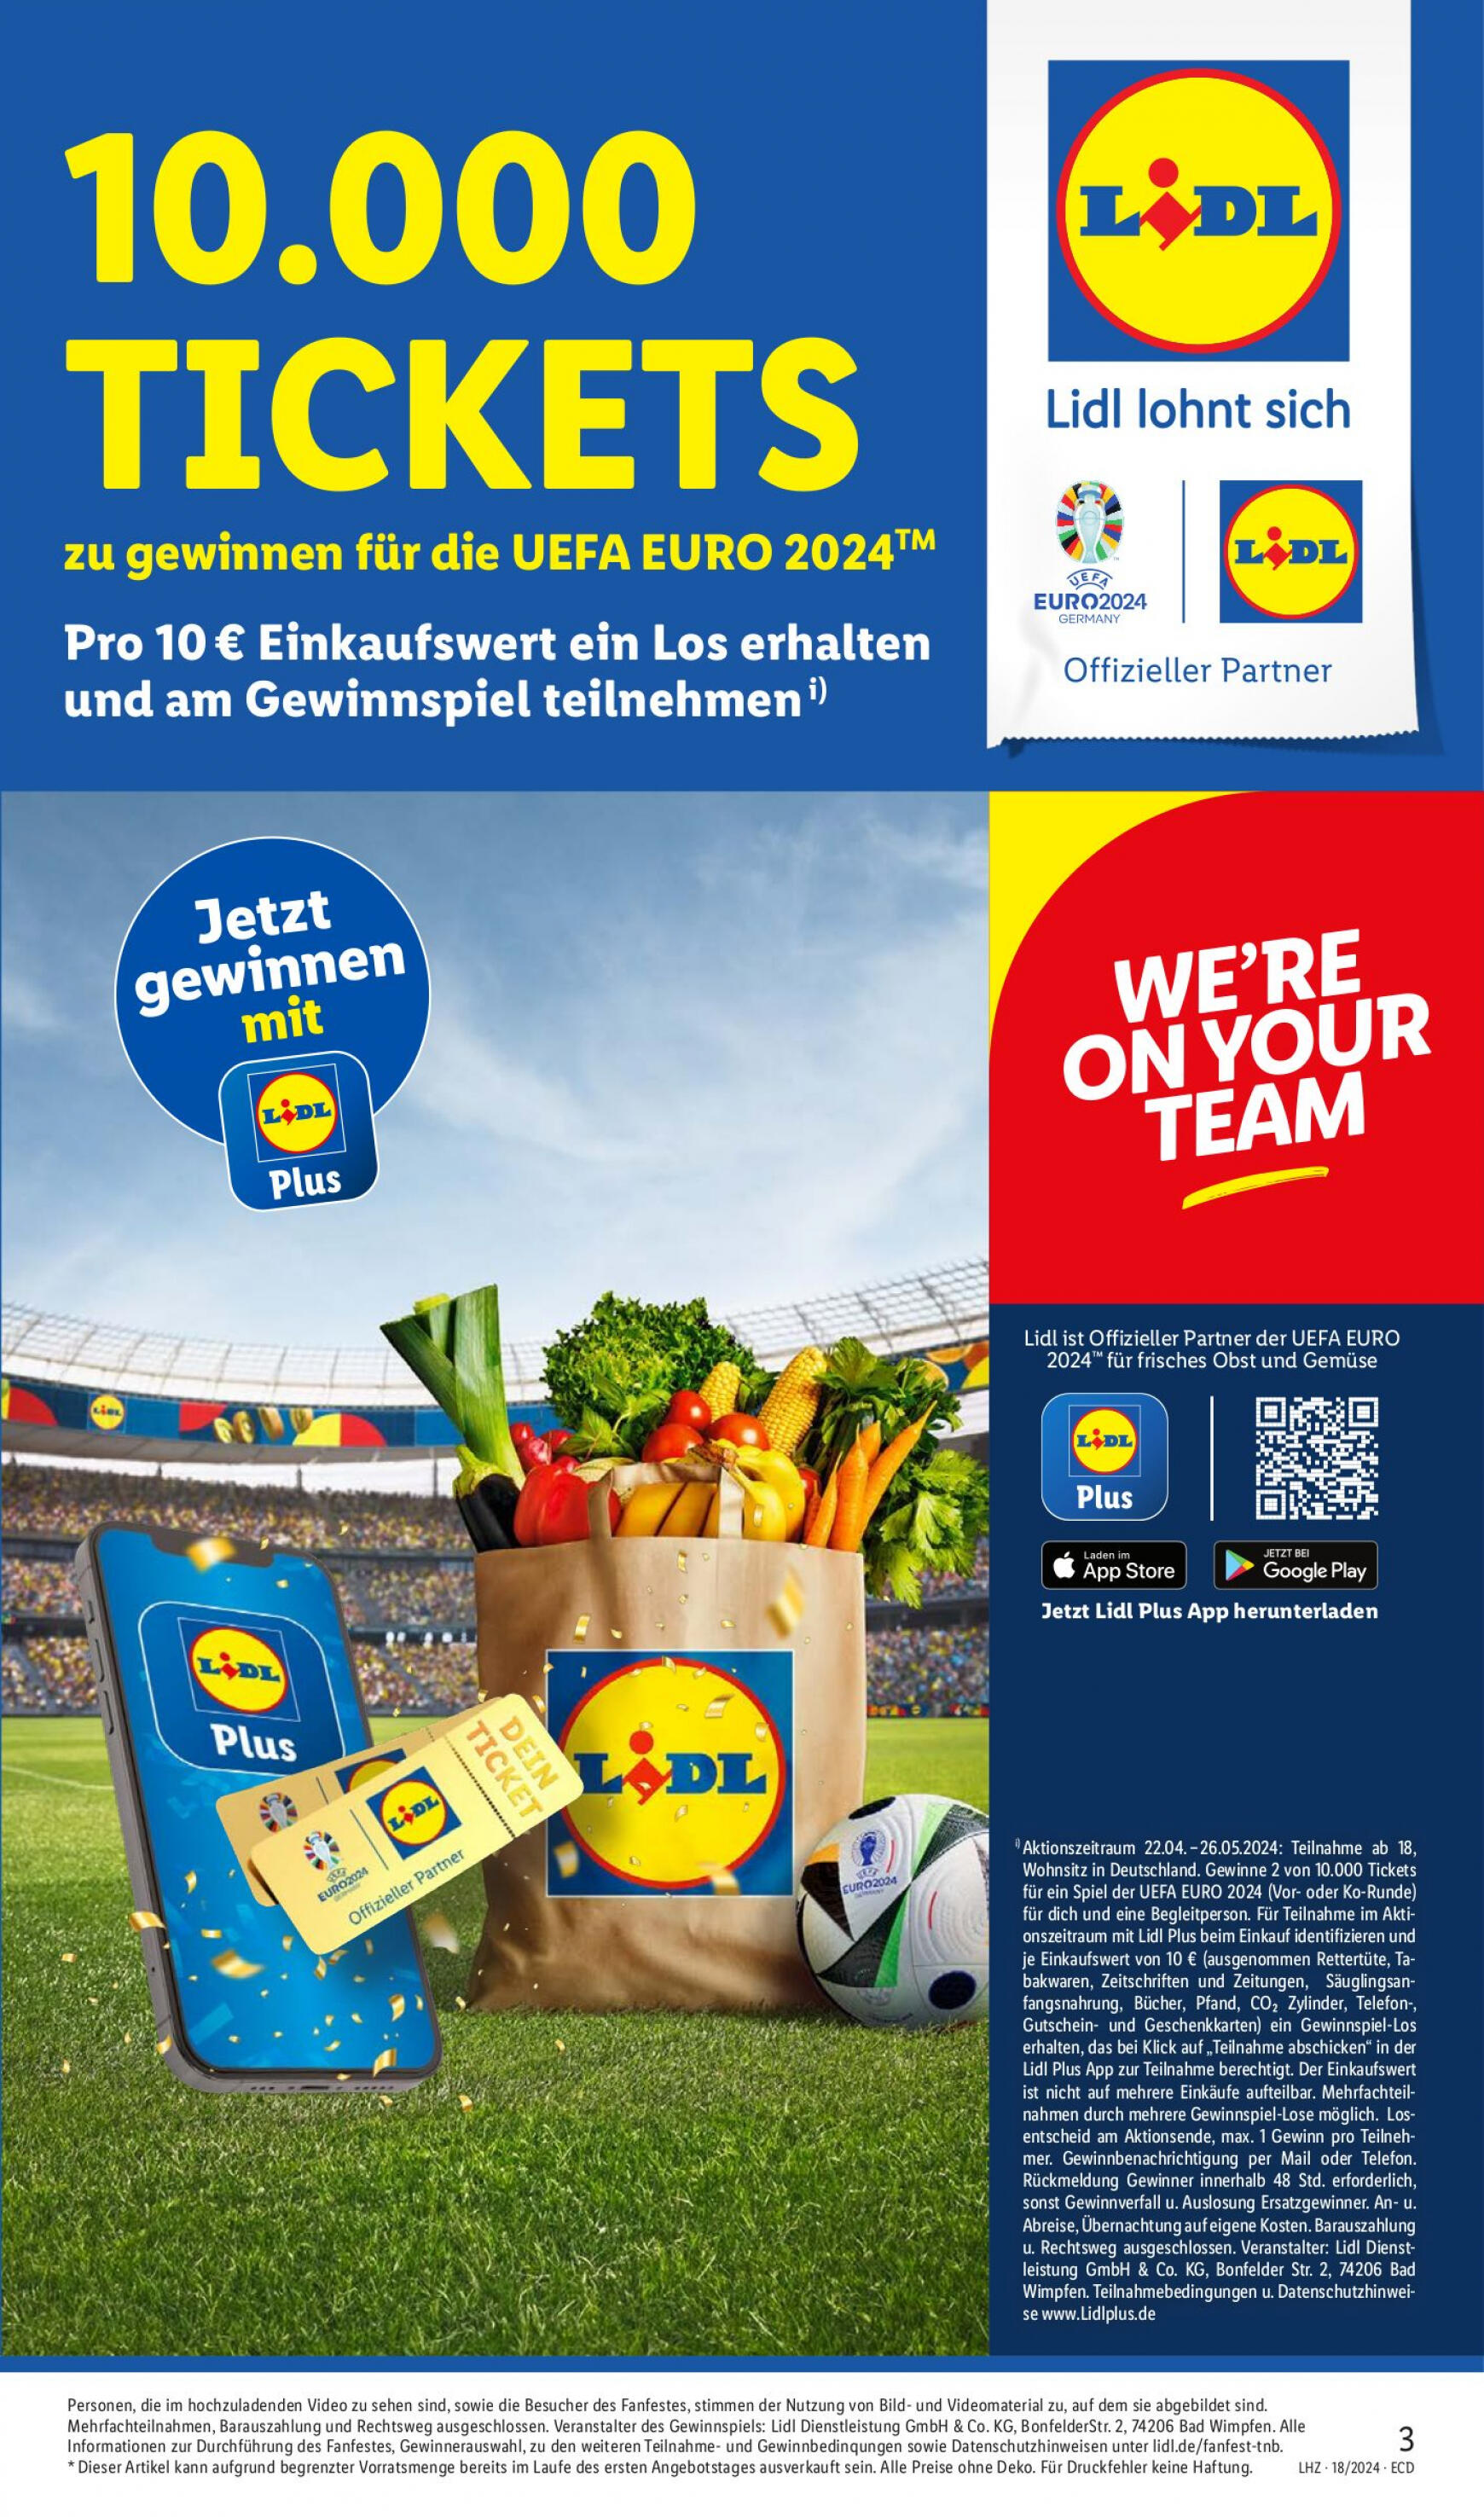 lidl - Flyer Lidl aktuell 29.04. - 04.05. - page: 3